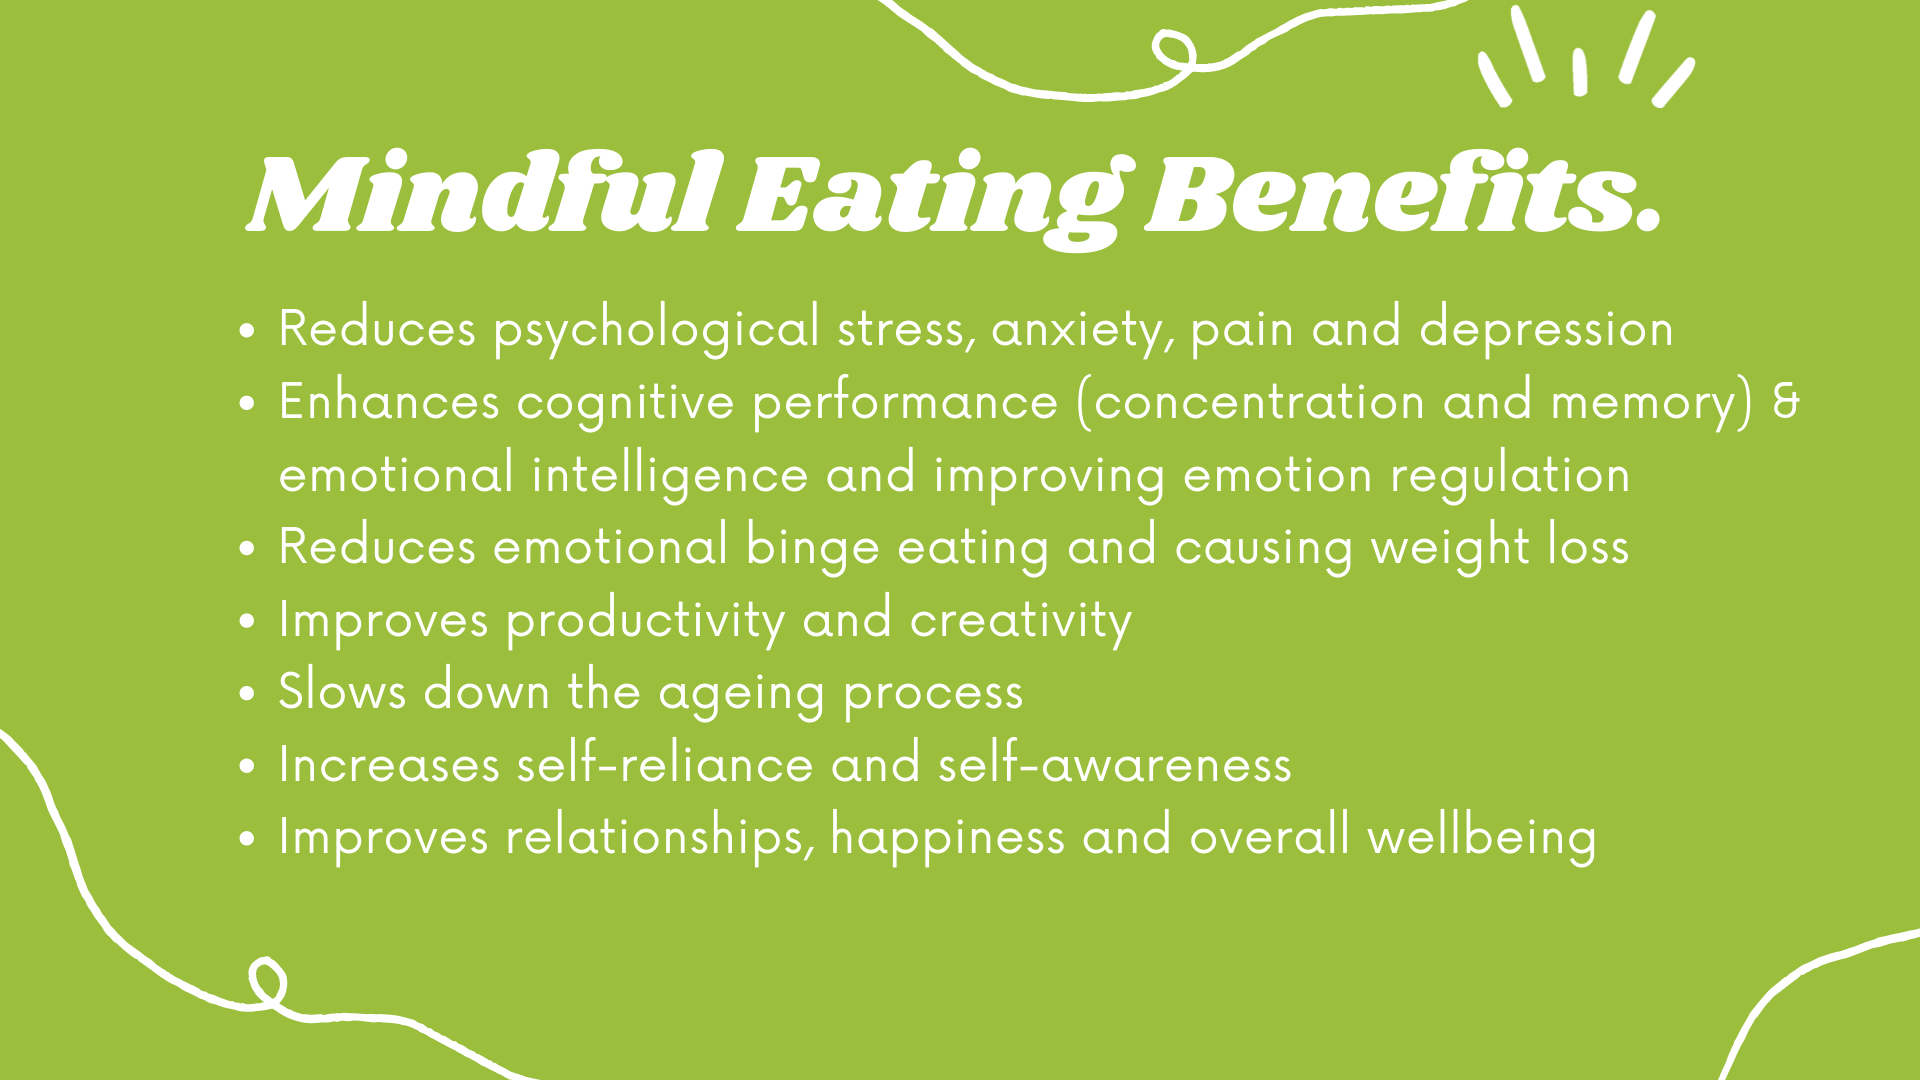 IV. The Impact of Mindful Eating on Mental Performance